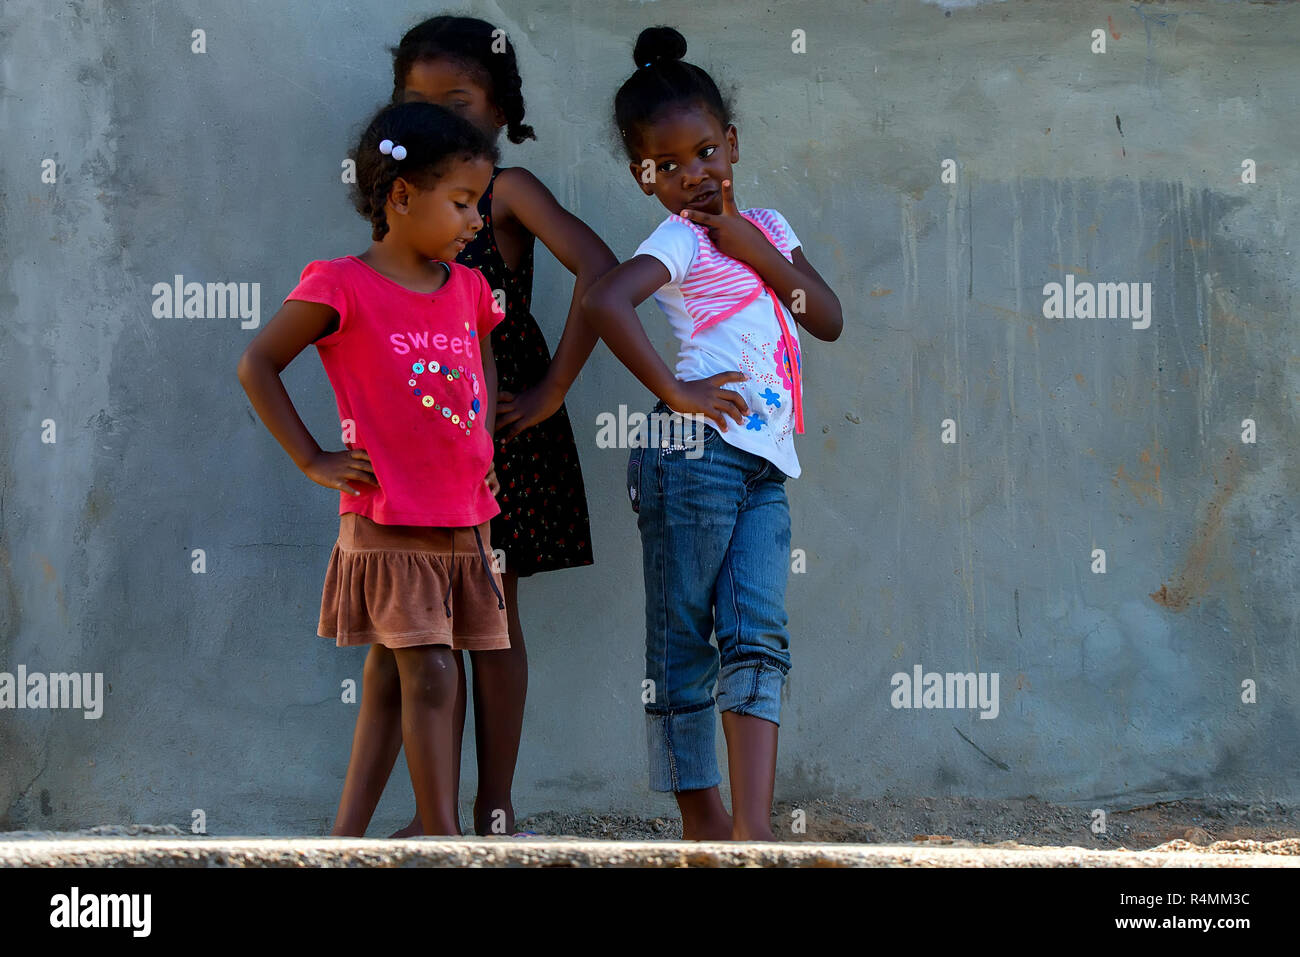 HIGUEY, DOMINICAN REPUBLIC - OCTOBER 29, 2015: Unidentified Dominican girls Stock Photo